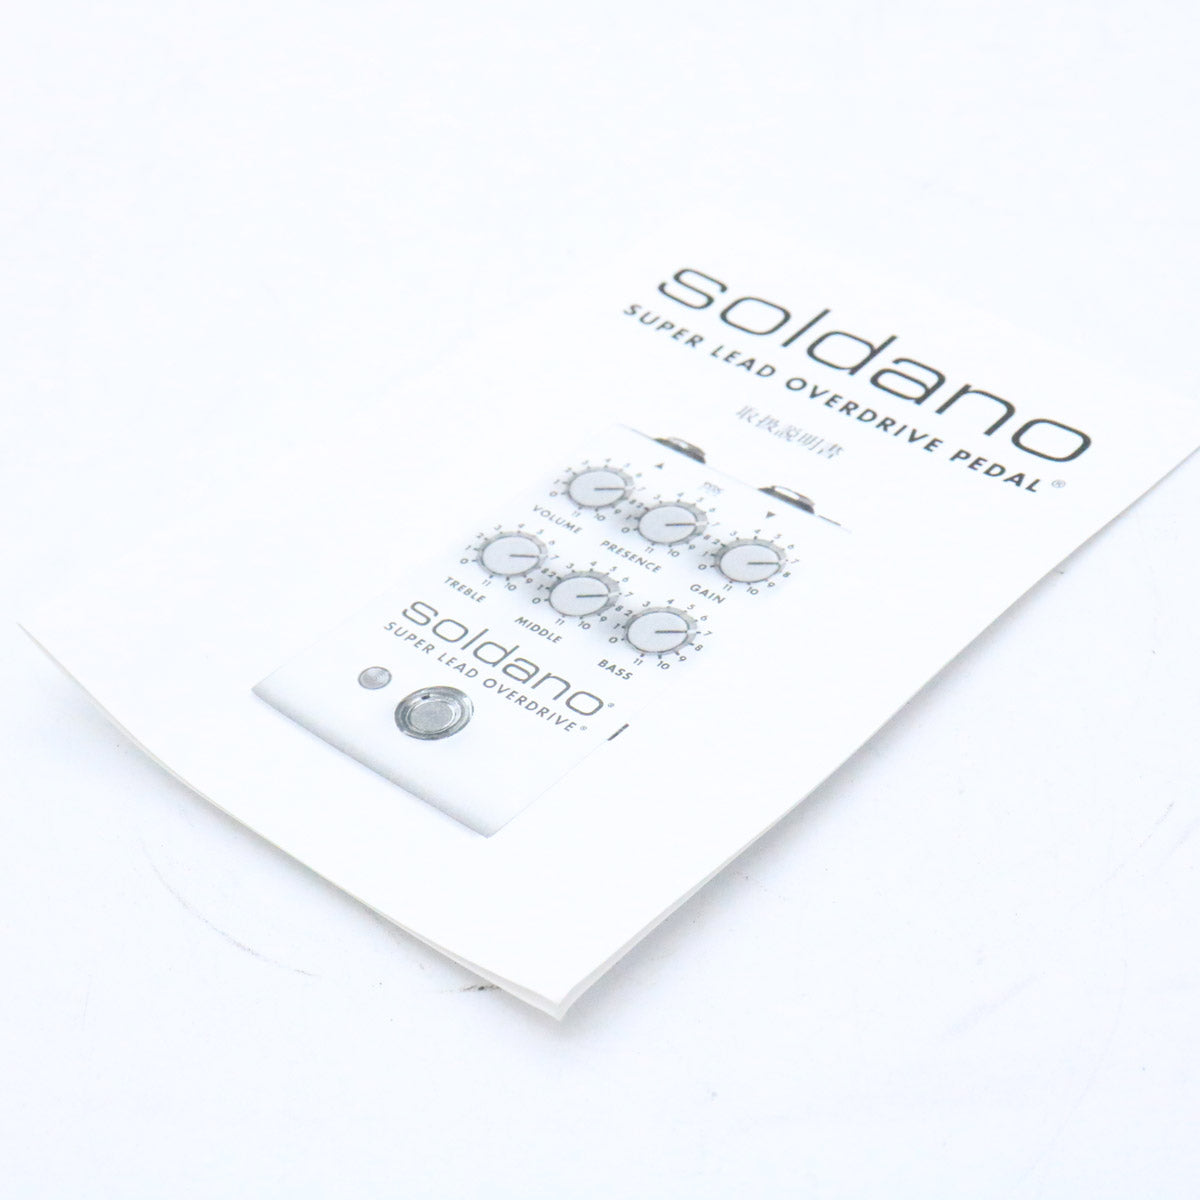 [SN 20330922233] USED Soldano / SLO Pedal Super Lead Overdrive Overdrive [08]